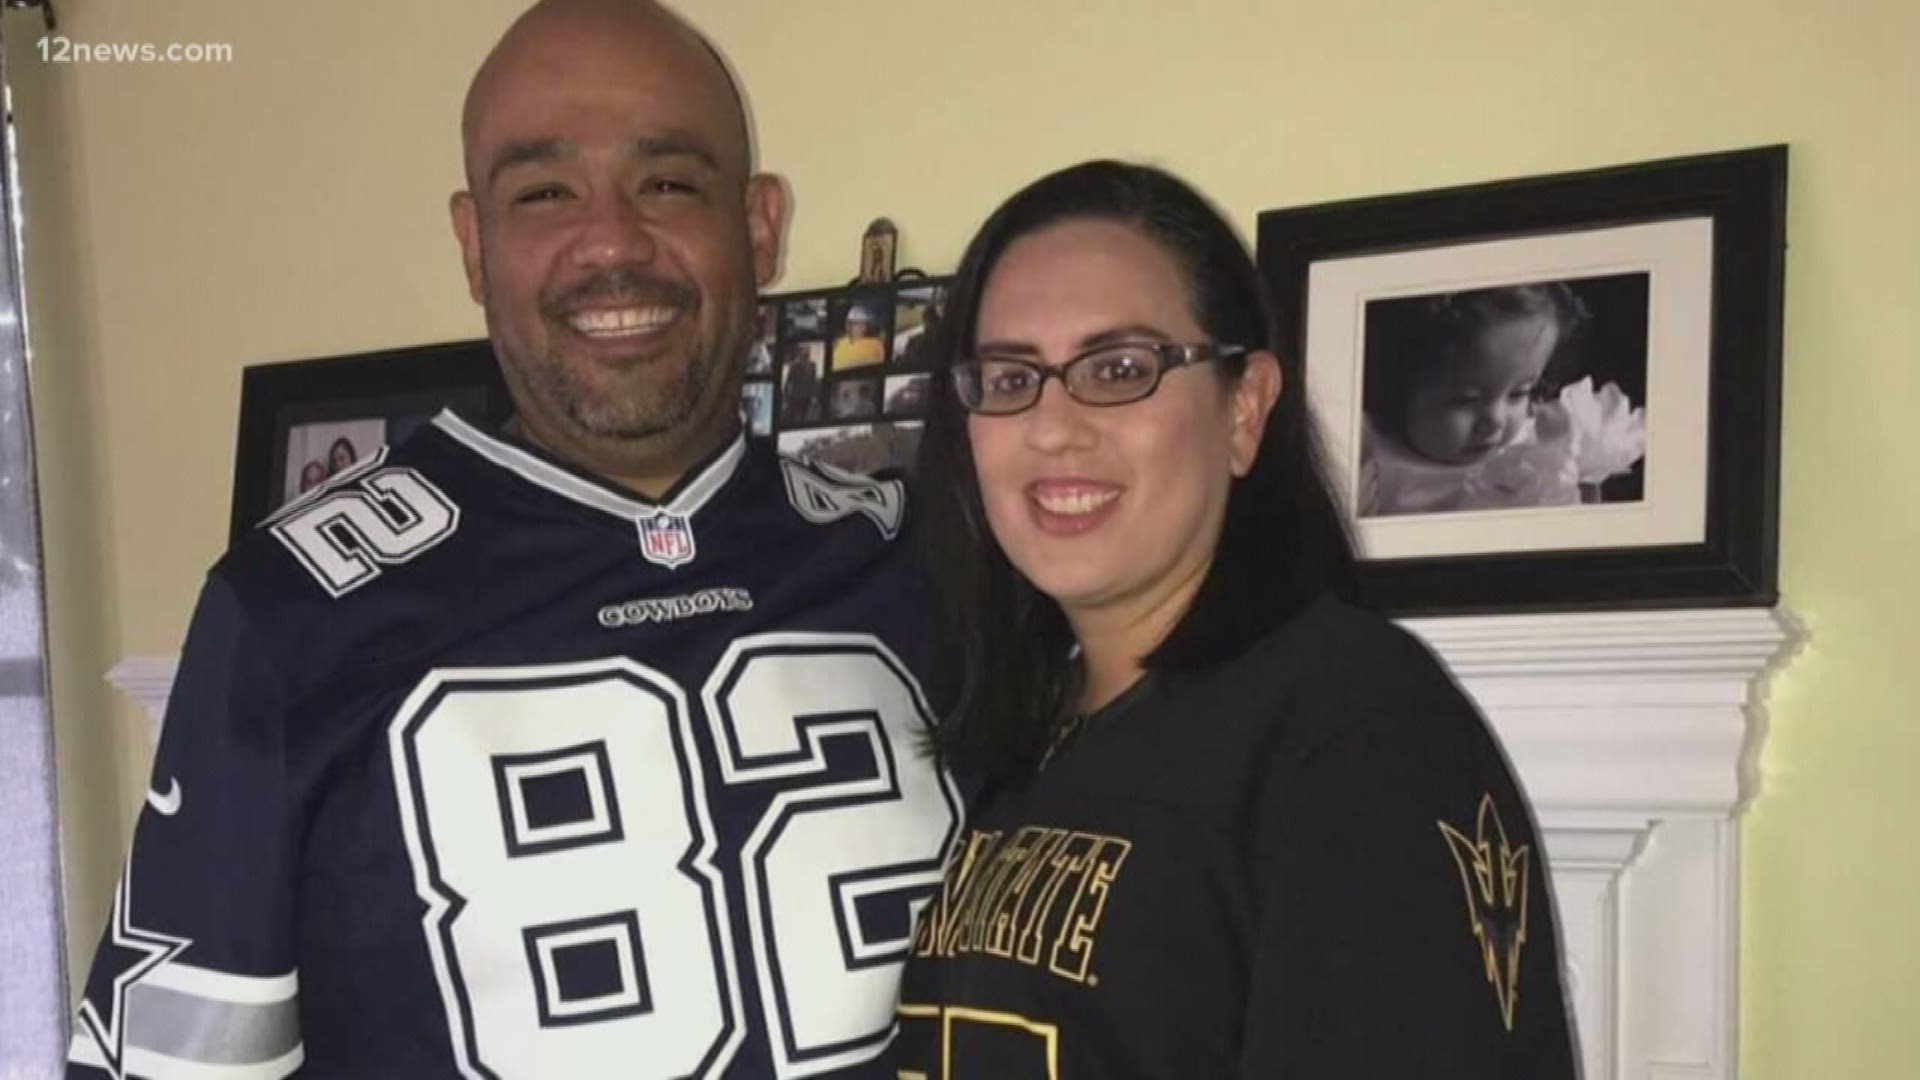 She's an A+ teacher and now she's hoping for a kidney match. Michelle Palomo describes going through dialysis with her husband.